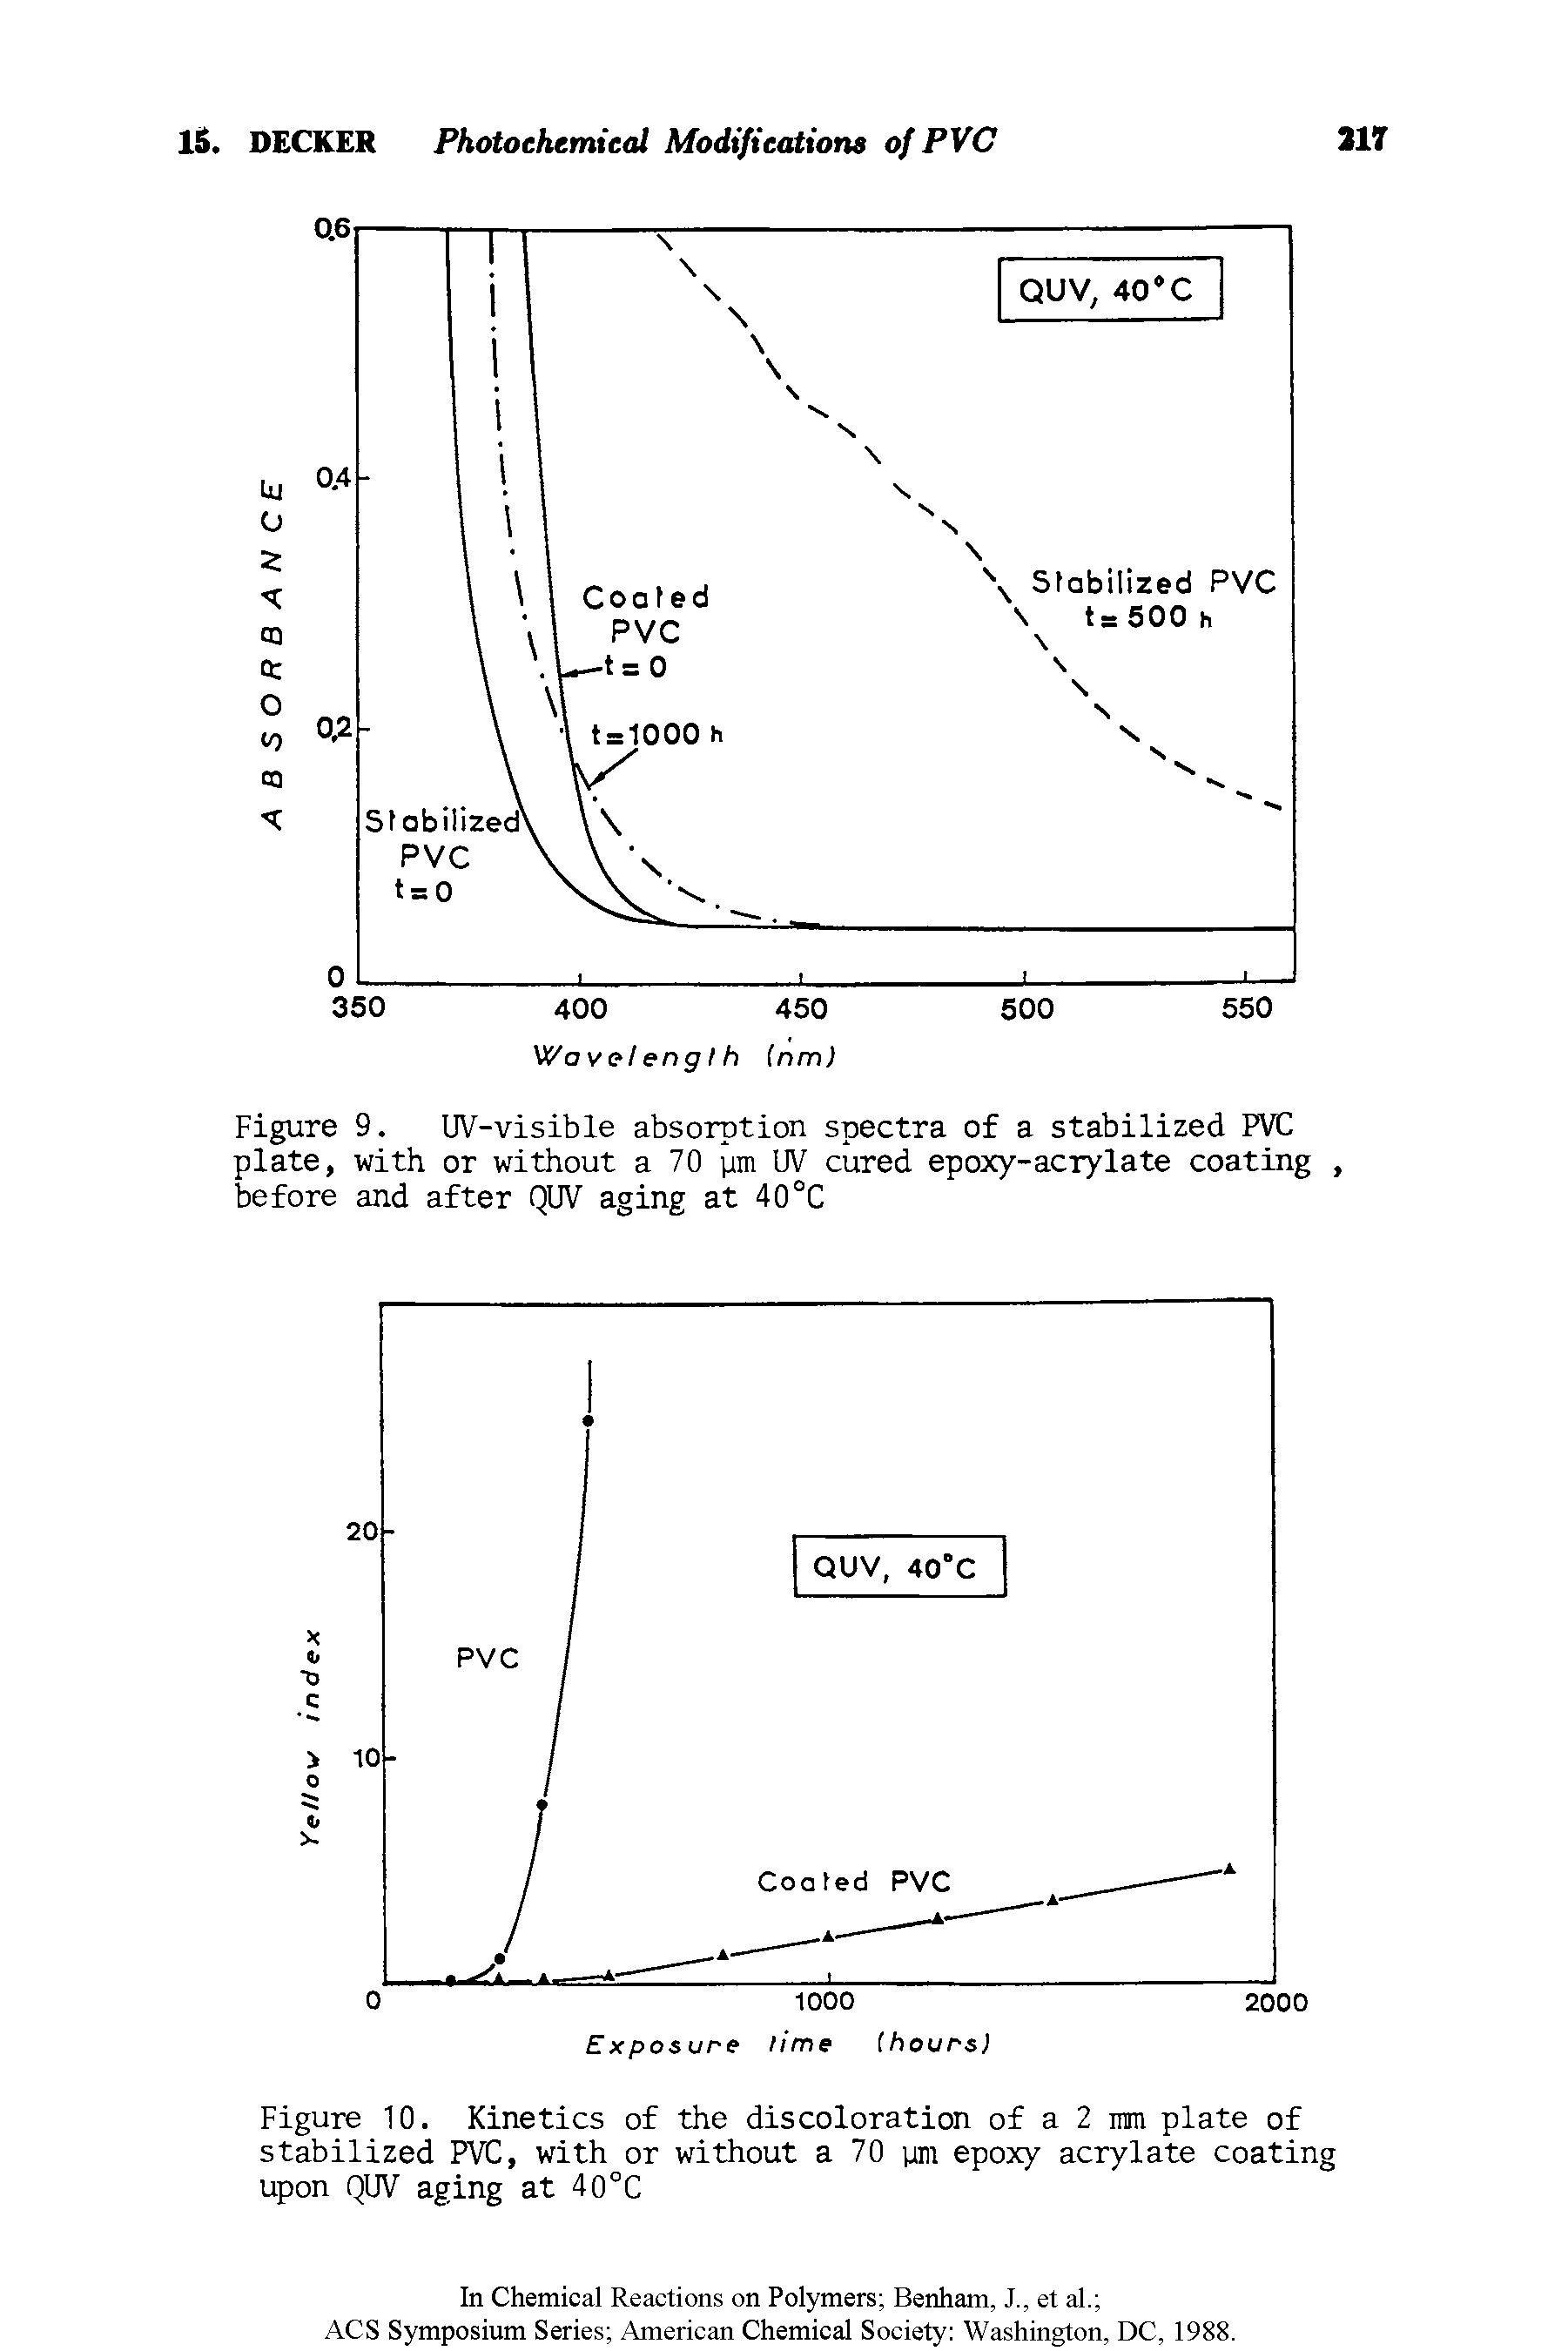 Figure 9. UV-visible absorption spectra of a stabilized PVC plate, with or without a 70 yin UV cured epoxy-acrylate coating, before and after QUV aging at 40°C...